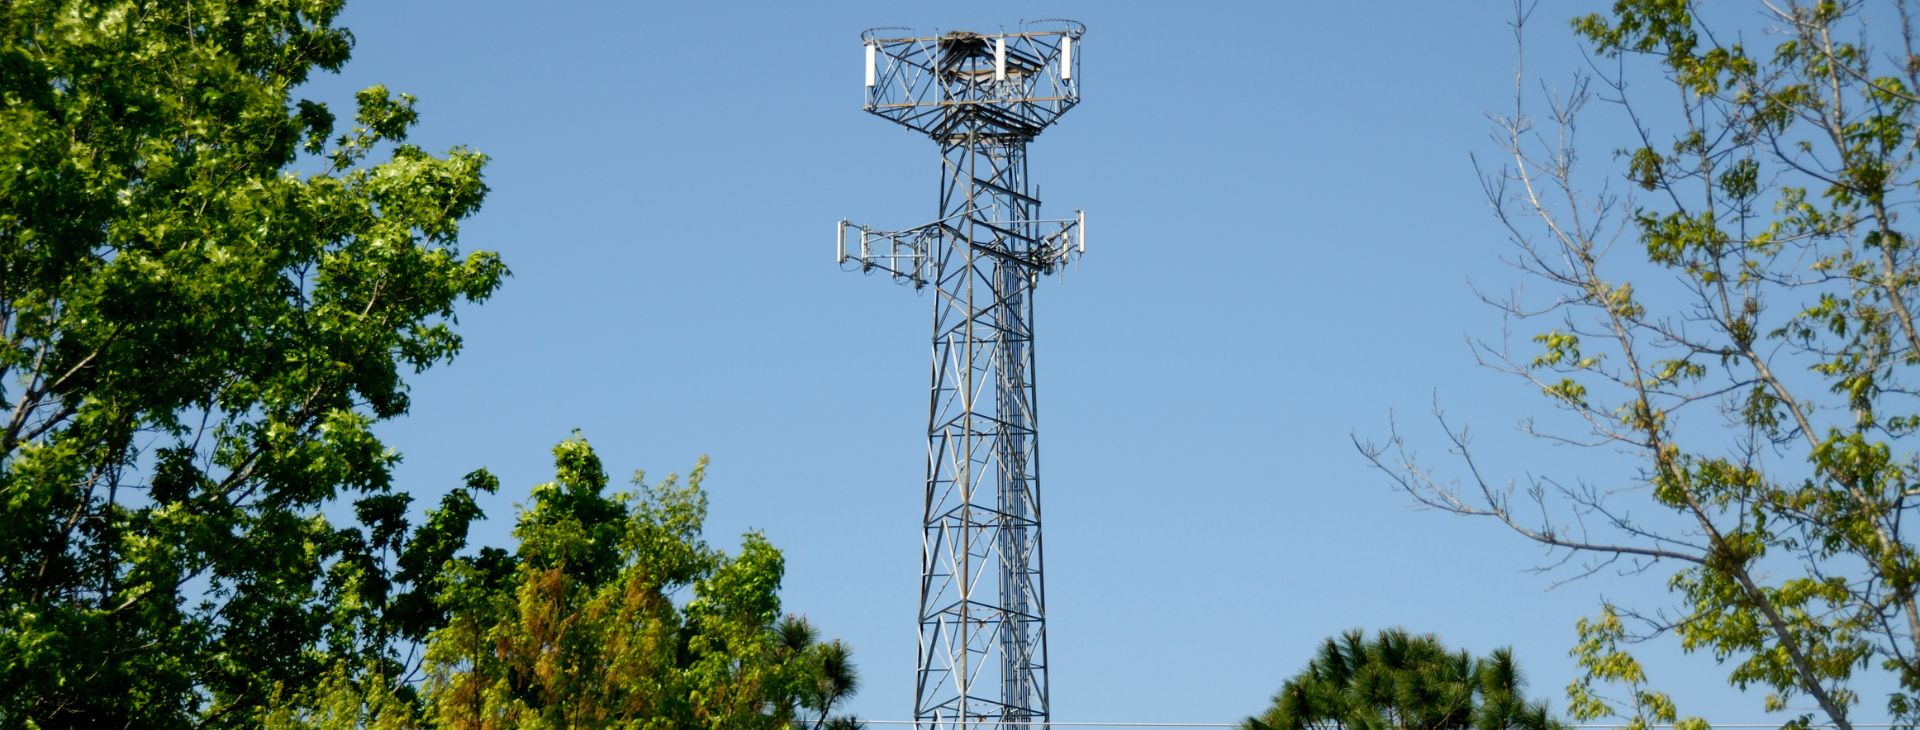 A cell phone tower with a tall metal antenna standing tall against the sky.